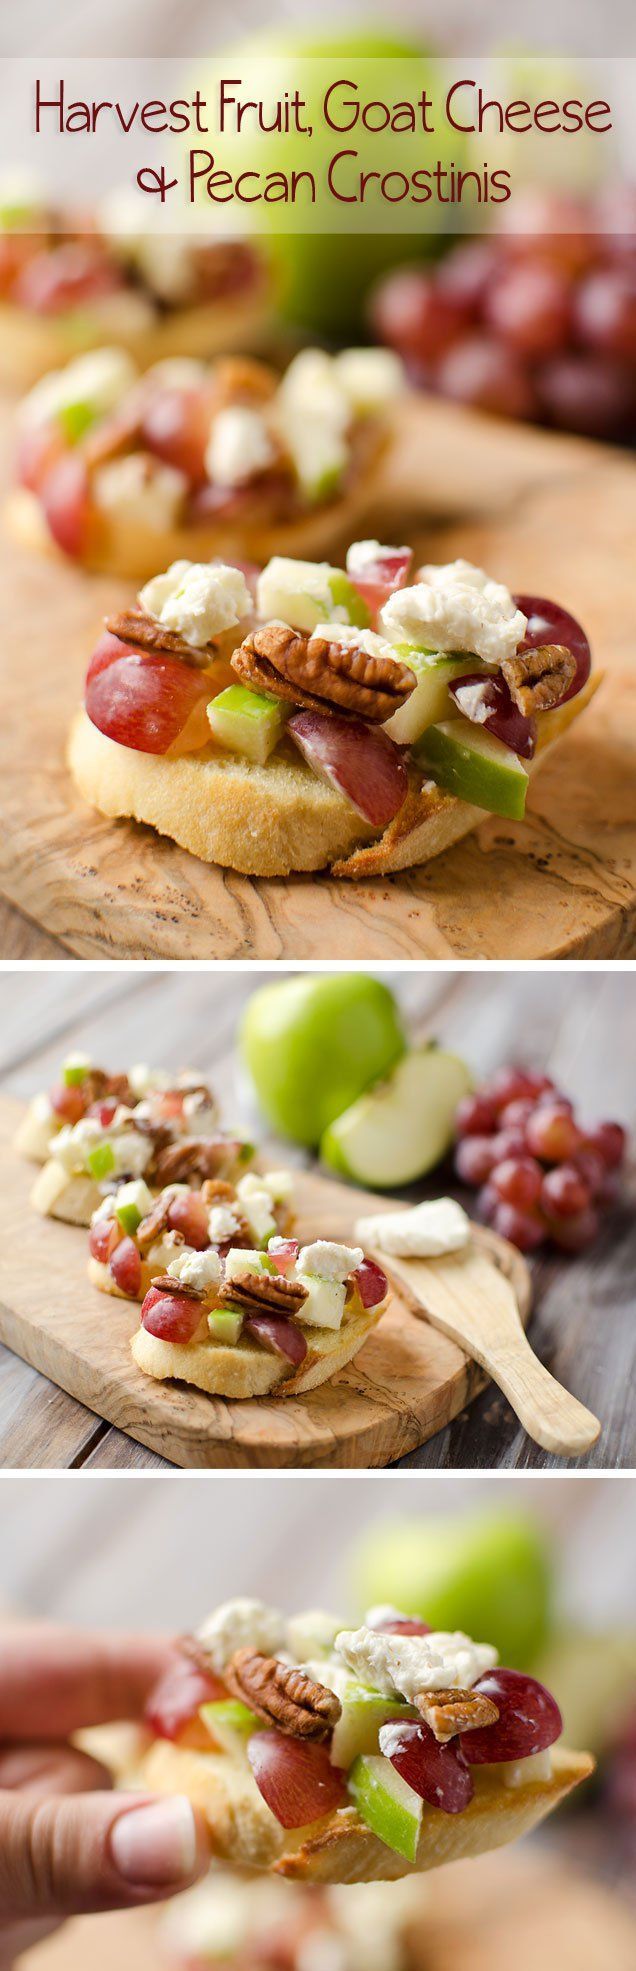 Harvest Fruit, Goat Cheese & Pecan Crostinis – A fantastic appetizer recipe for the holidays!